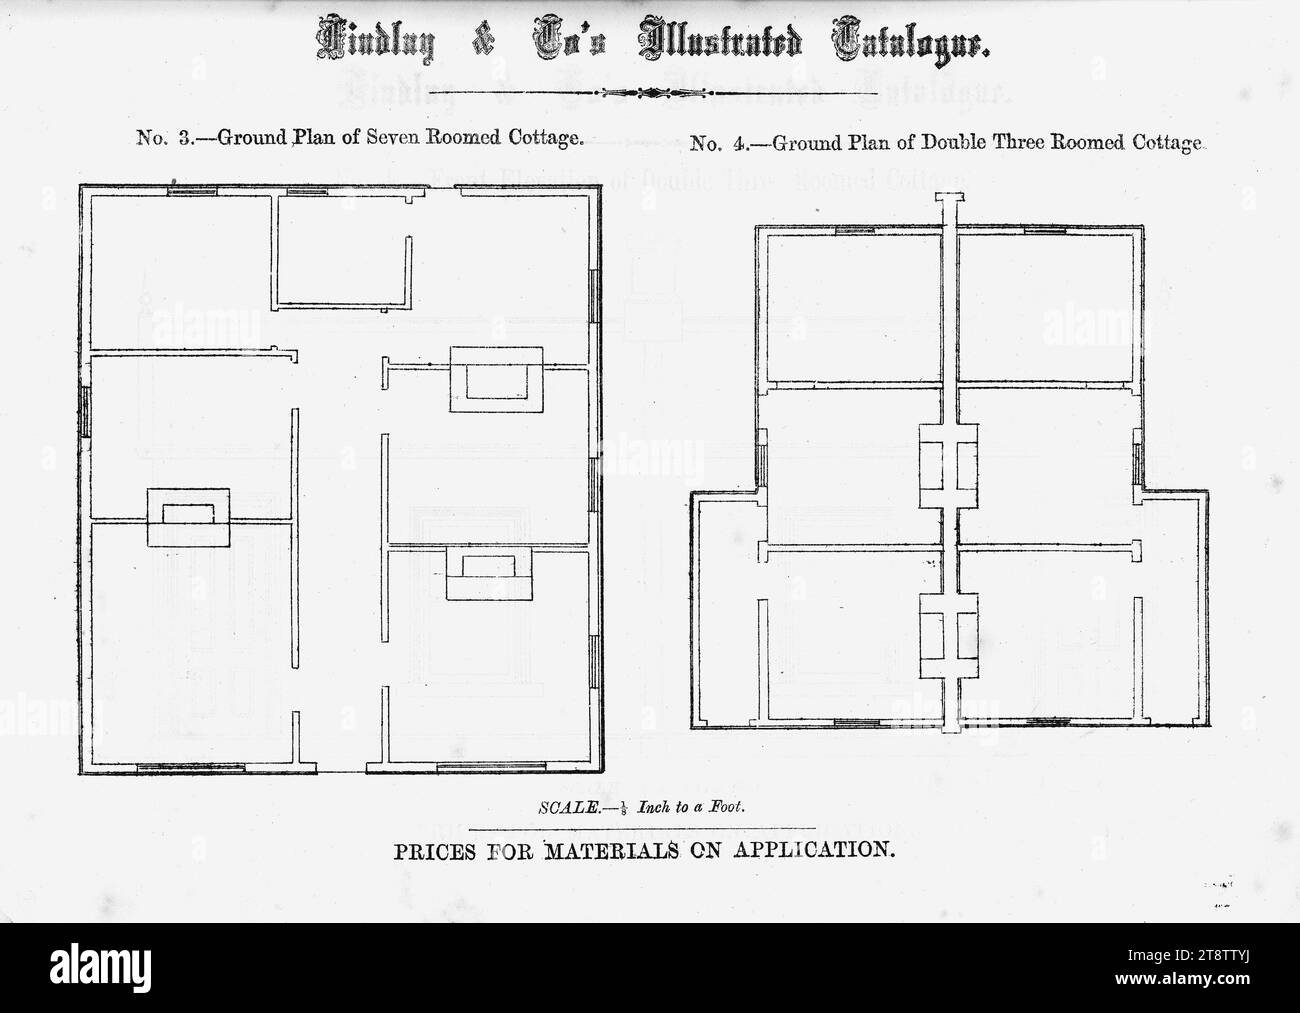 Findlay & Co.: Findlay and Co's illustrated catalogue. No. 3. Ground plan of seven roomed cottage. Ground plan of double three roomed cottage. Scale 1/8 inch to a foot. Prices for material on application. 1874, Shows plans of two cottages, with fireplaces and walls shown Stock Photo